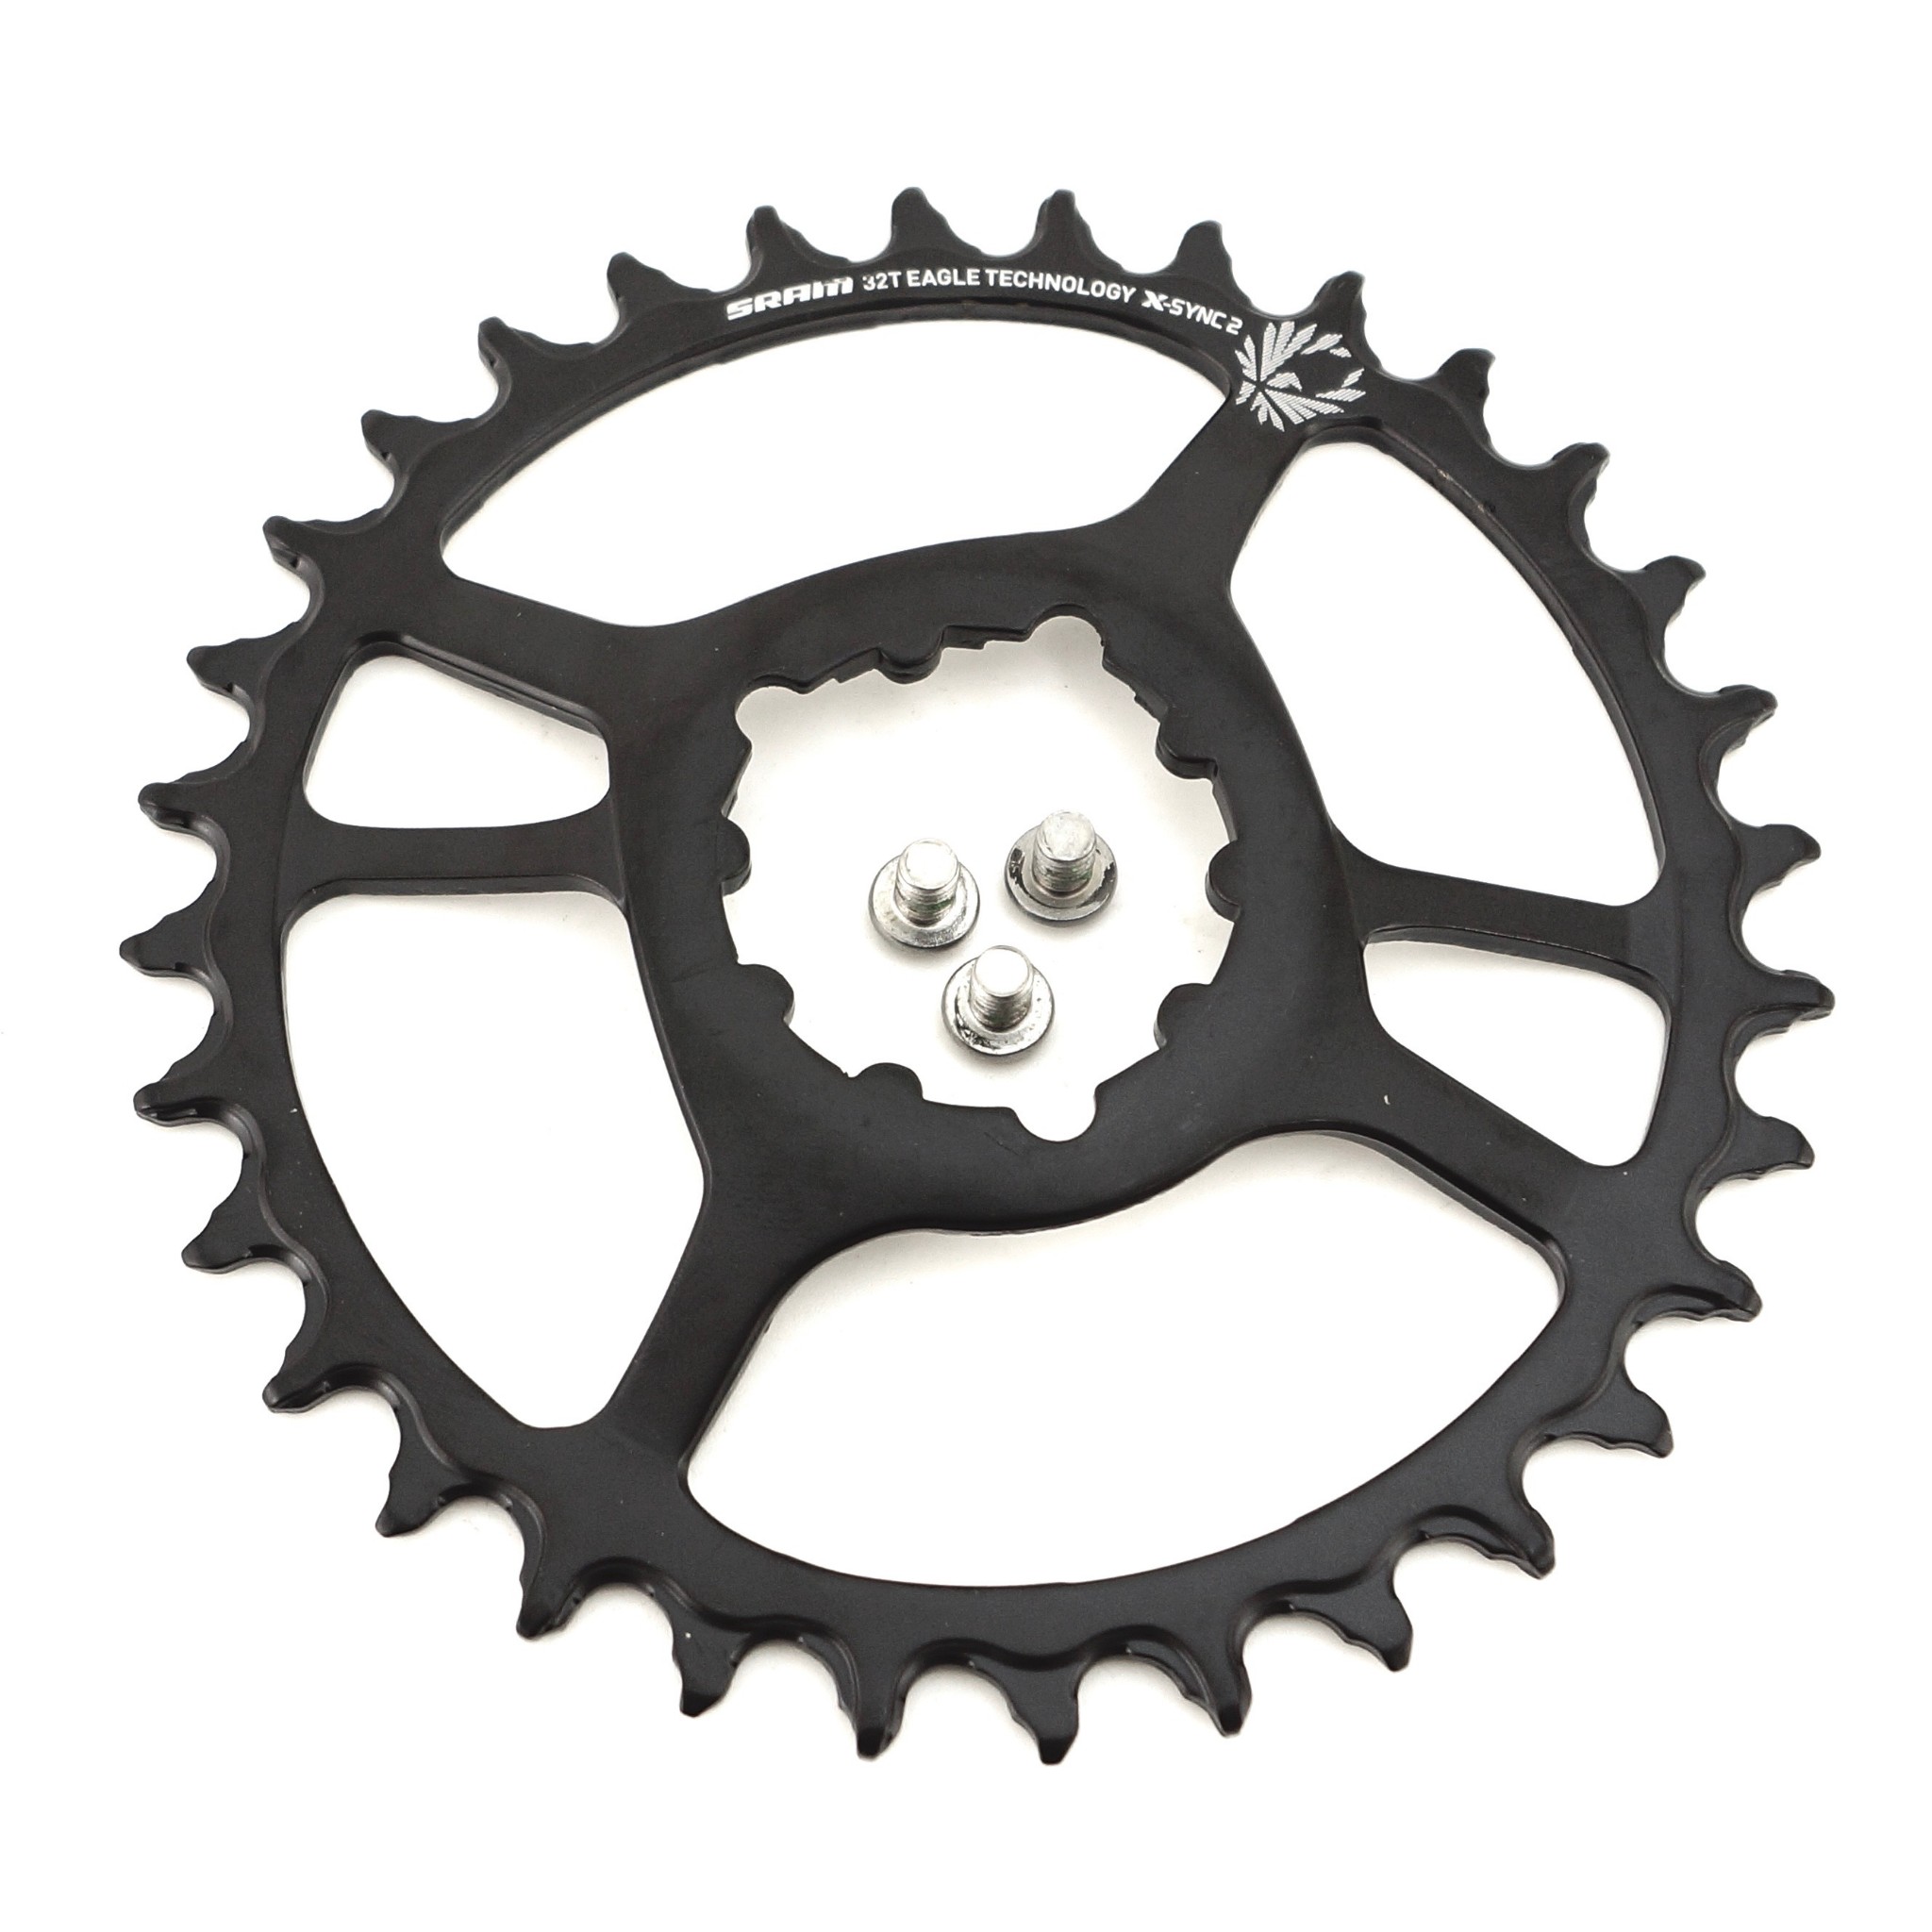 SRAM X-Sync 2 Steel Eagle Chainring 32t Direct Mount 6mm Offset Black